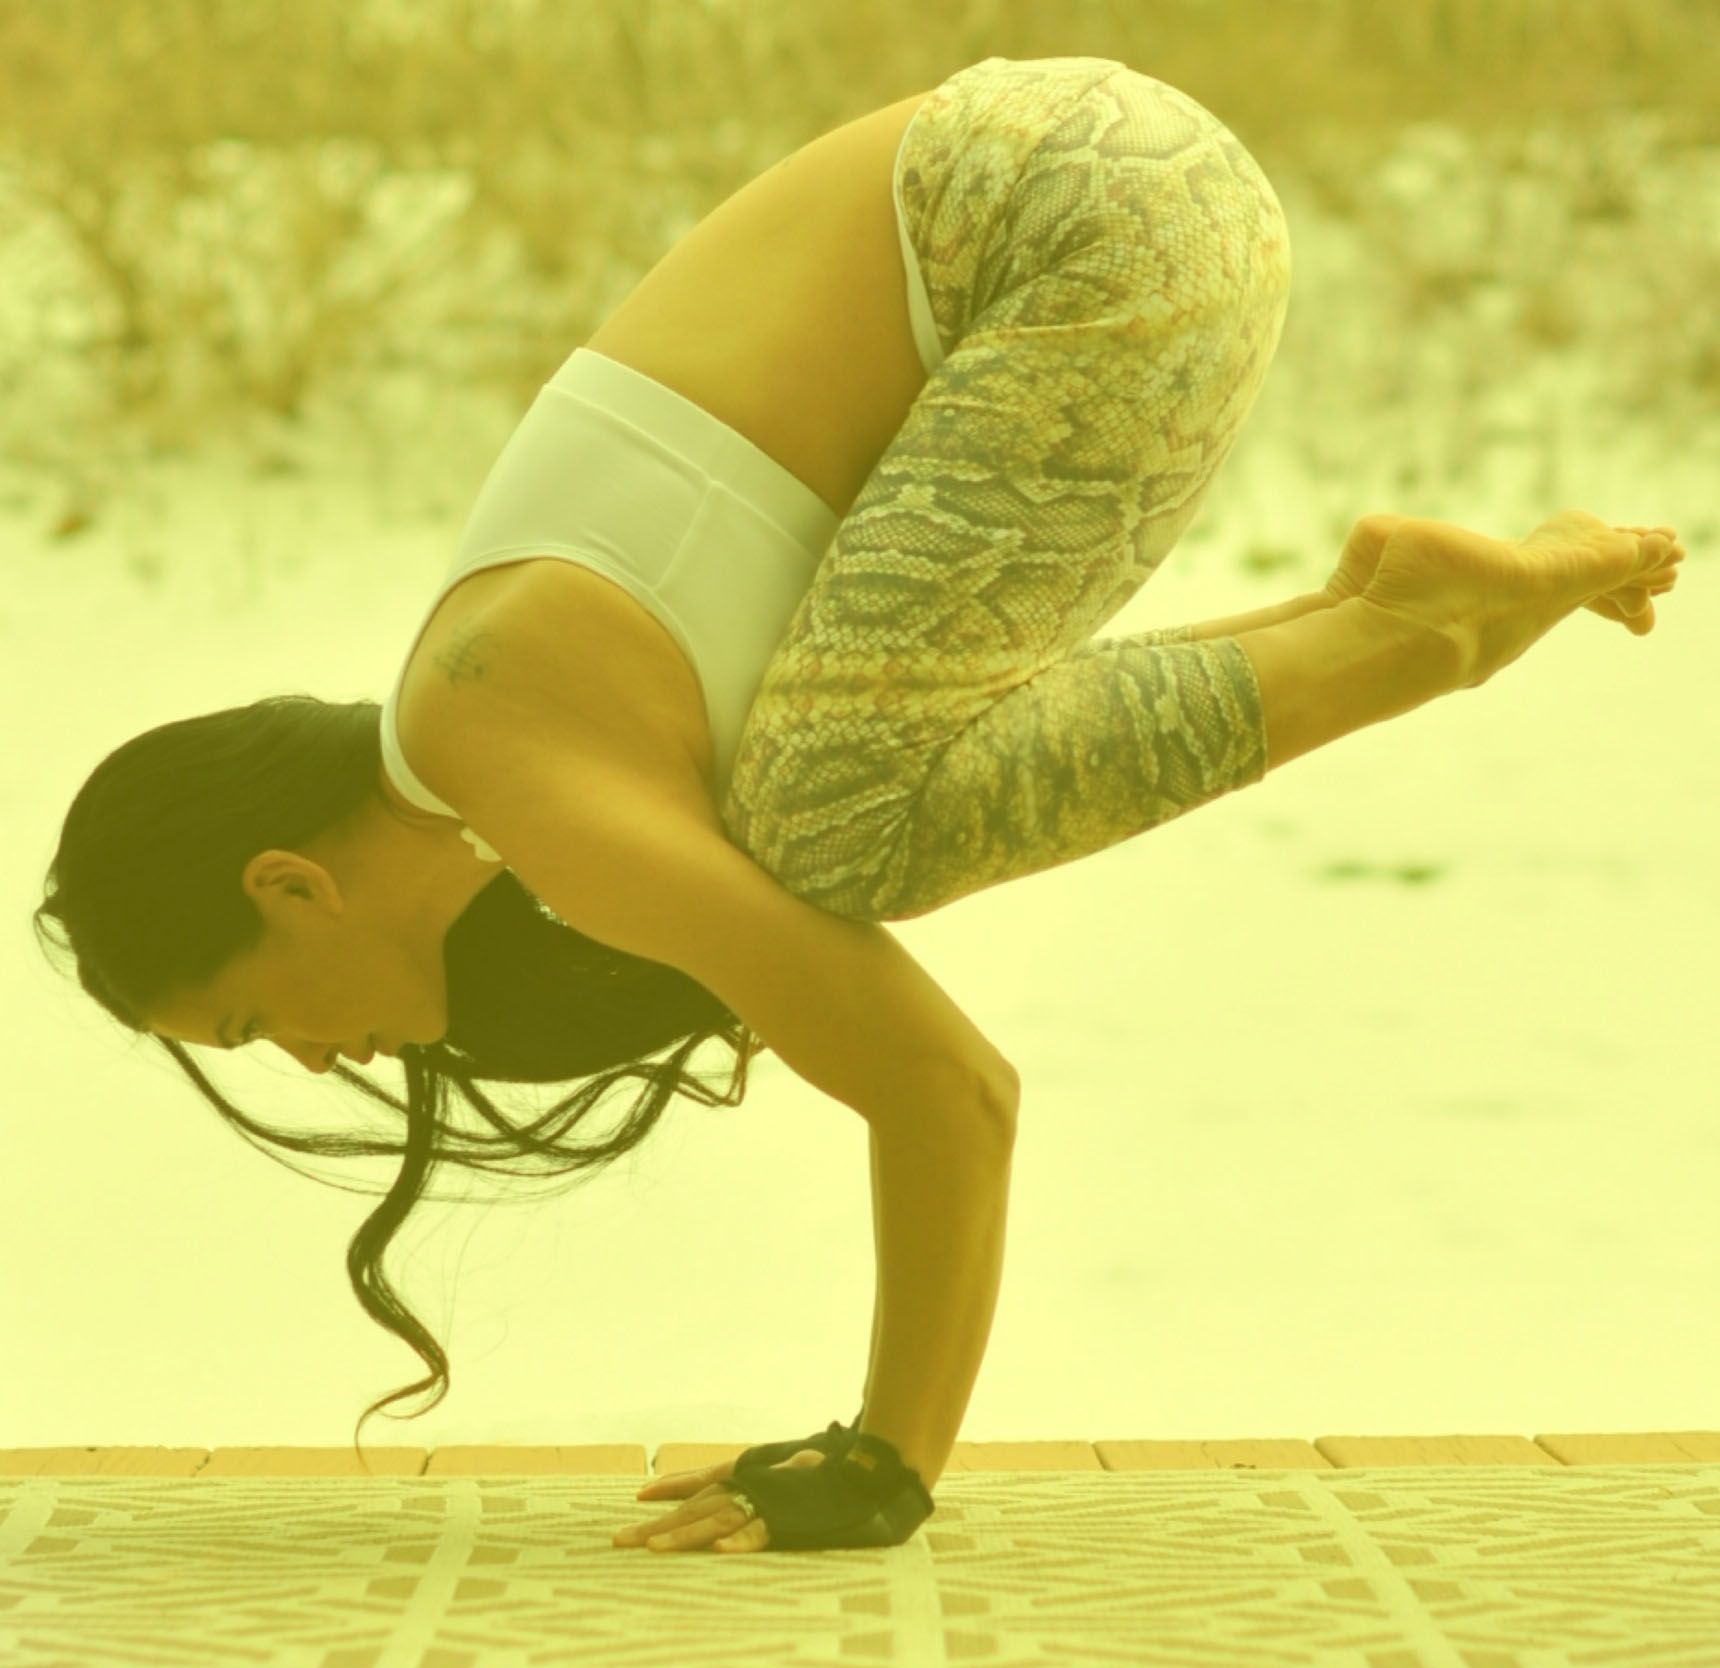 Ayubless Ayurveda - BAKASAN Crane Pose or otherwise called as Bakasana in  Sanskrit, is a powerful, yet simple arm balancing pose. Considered to be  one of the first poses' to master in